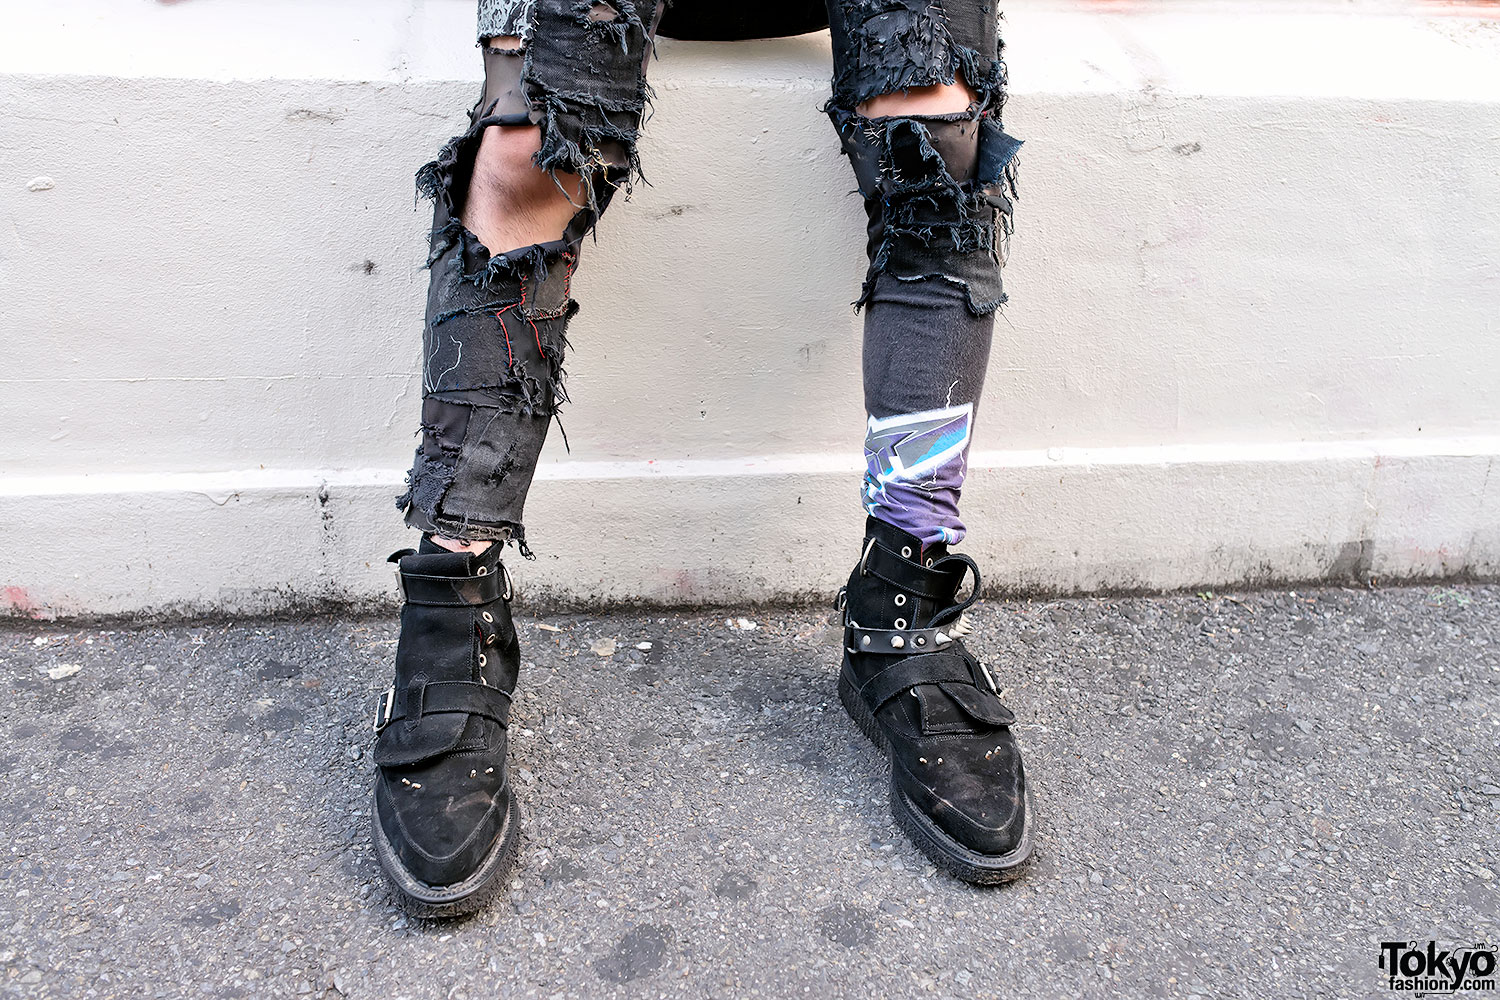 Harajuku Punk Style w/ Mohawk, Leather Vest, Creepers & Ripped Jeans